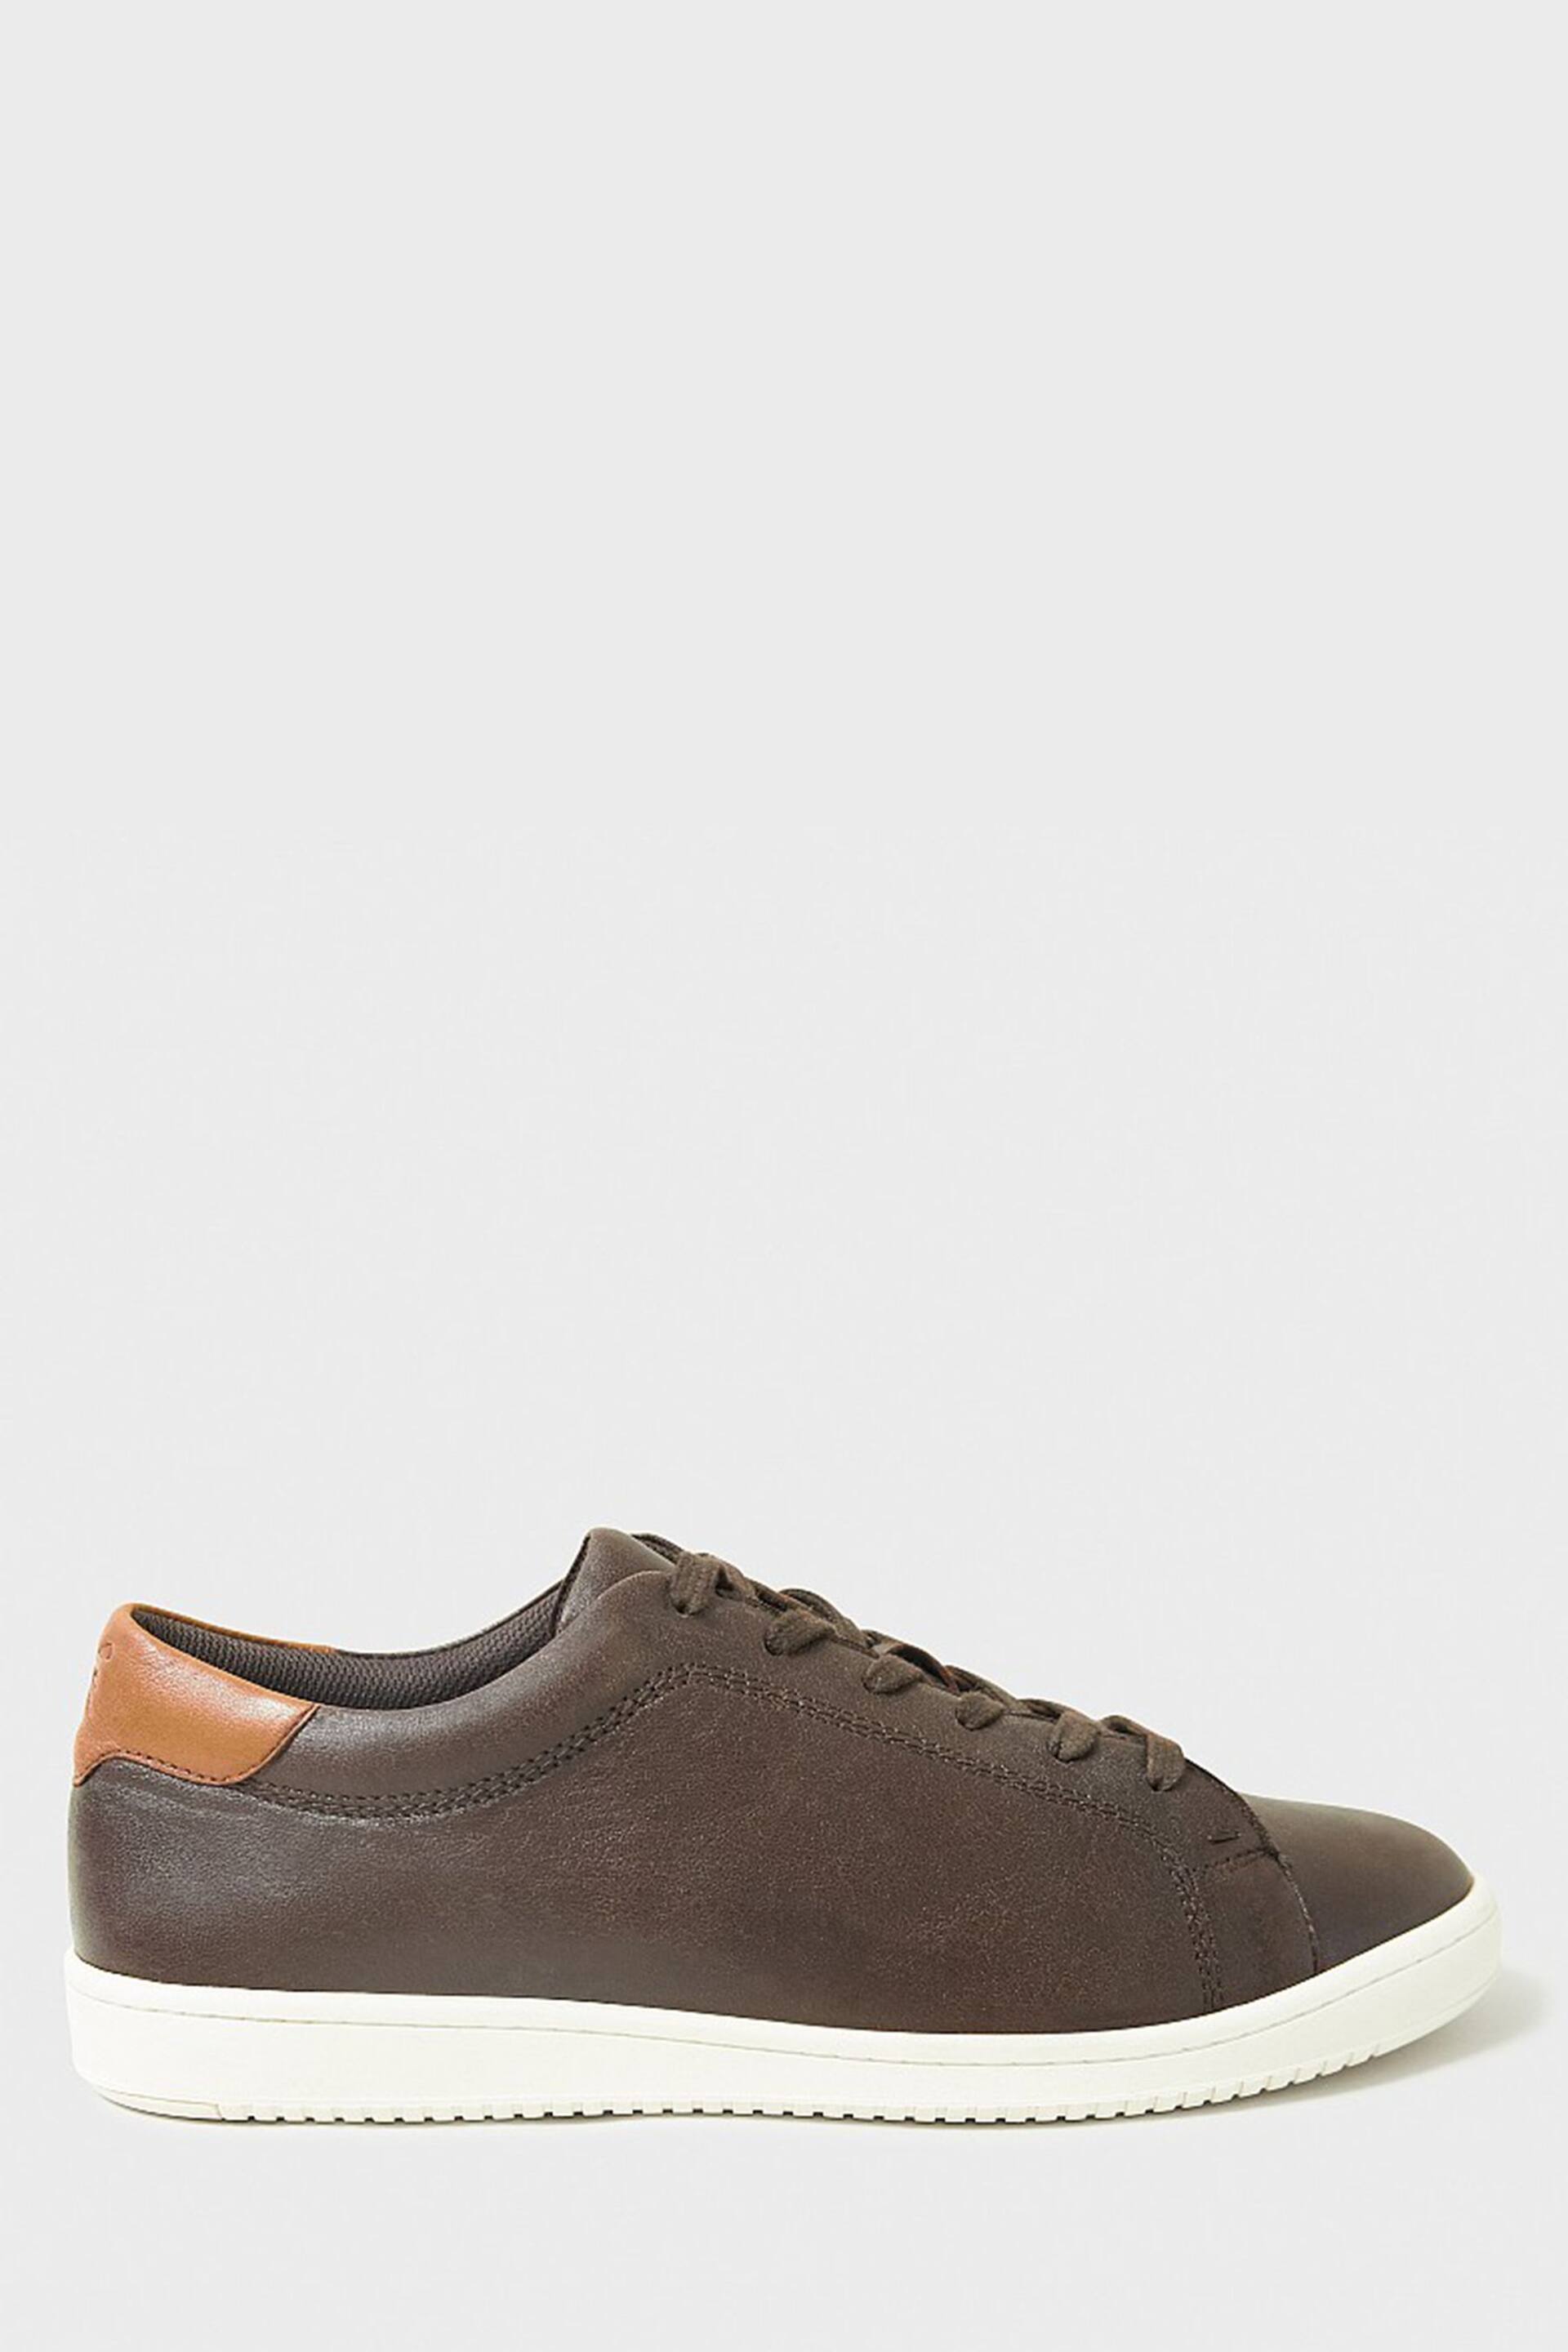 Crew Clothing Leather Lace Up Trainers - Image 5 of 6